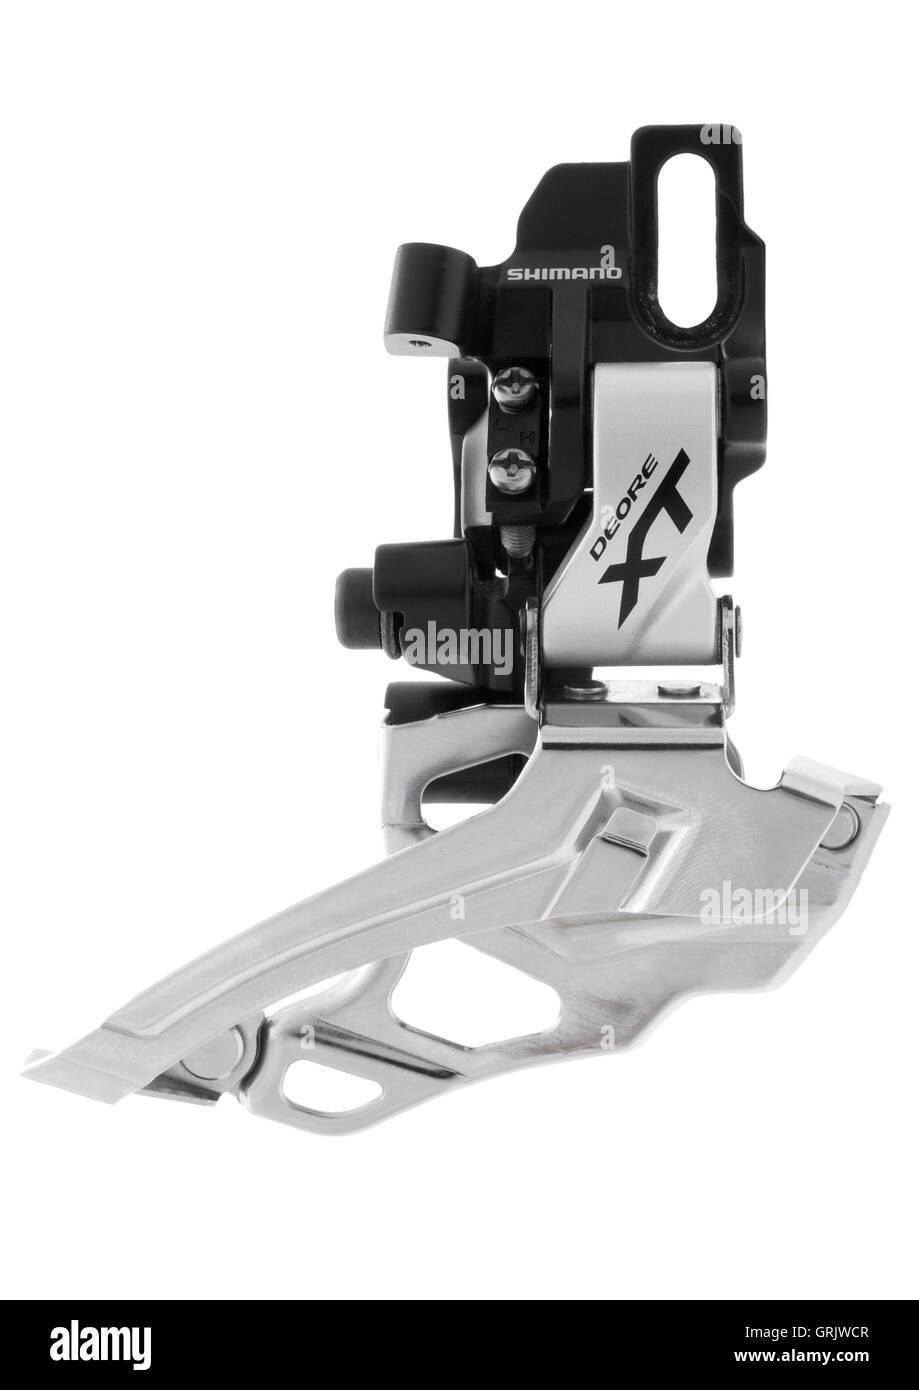 Shimano XT FD-M786 direct mount front derailleur on white background Stock Photo